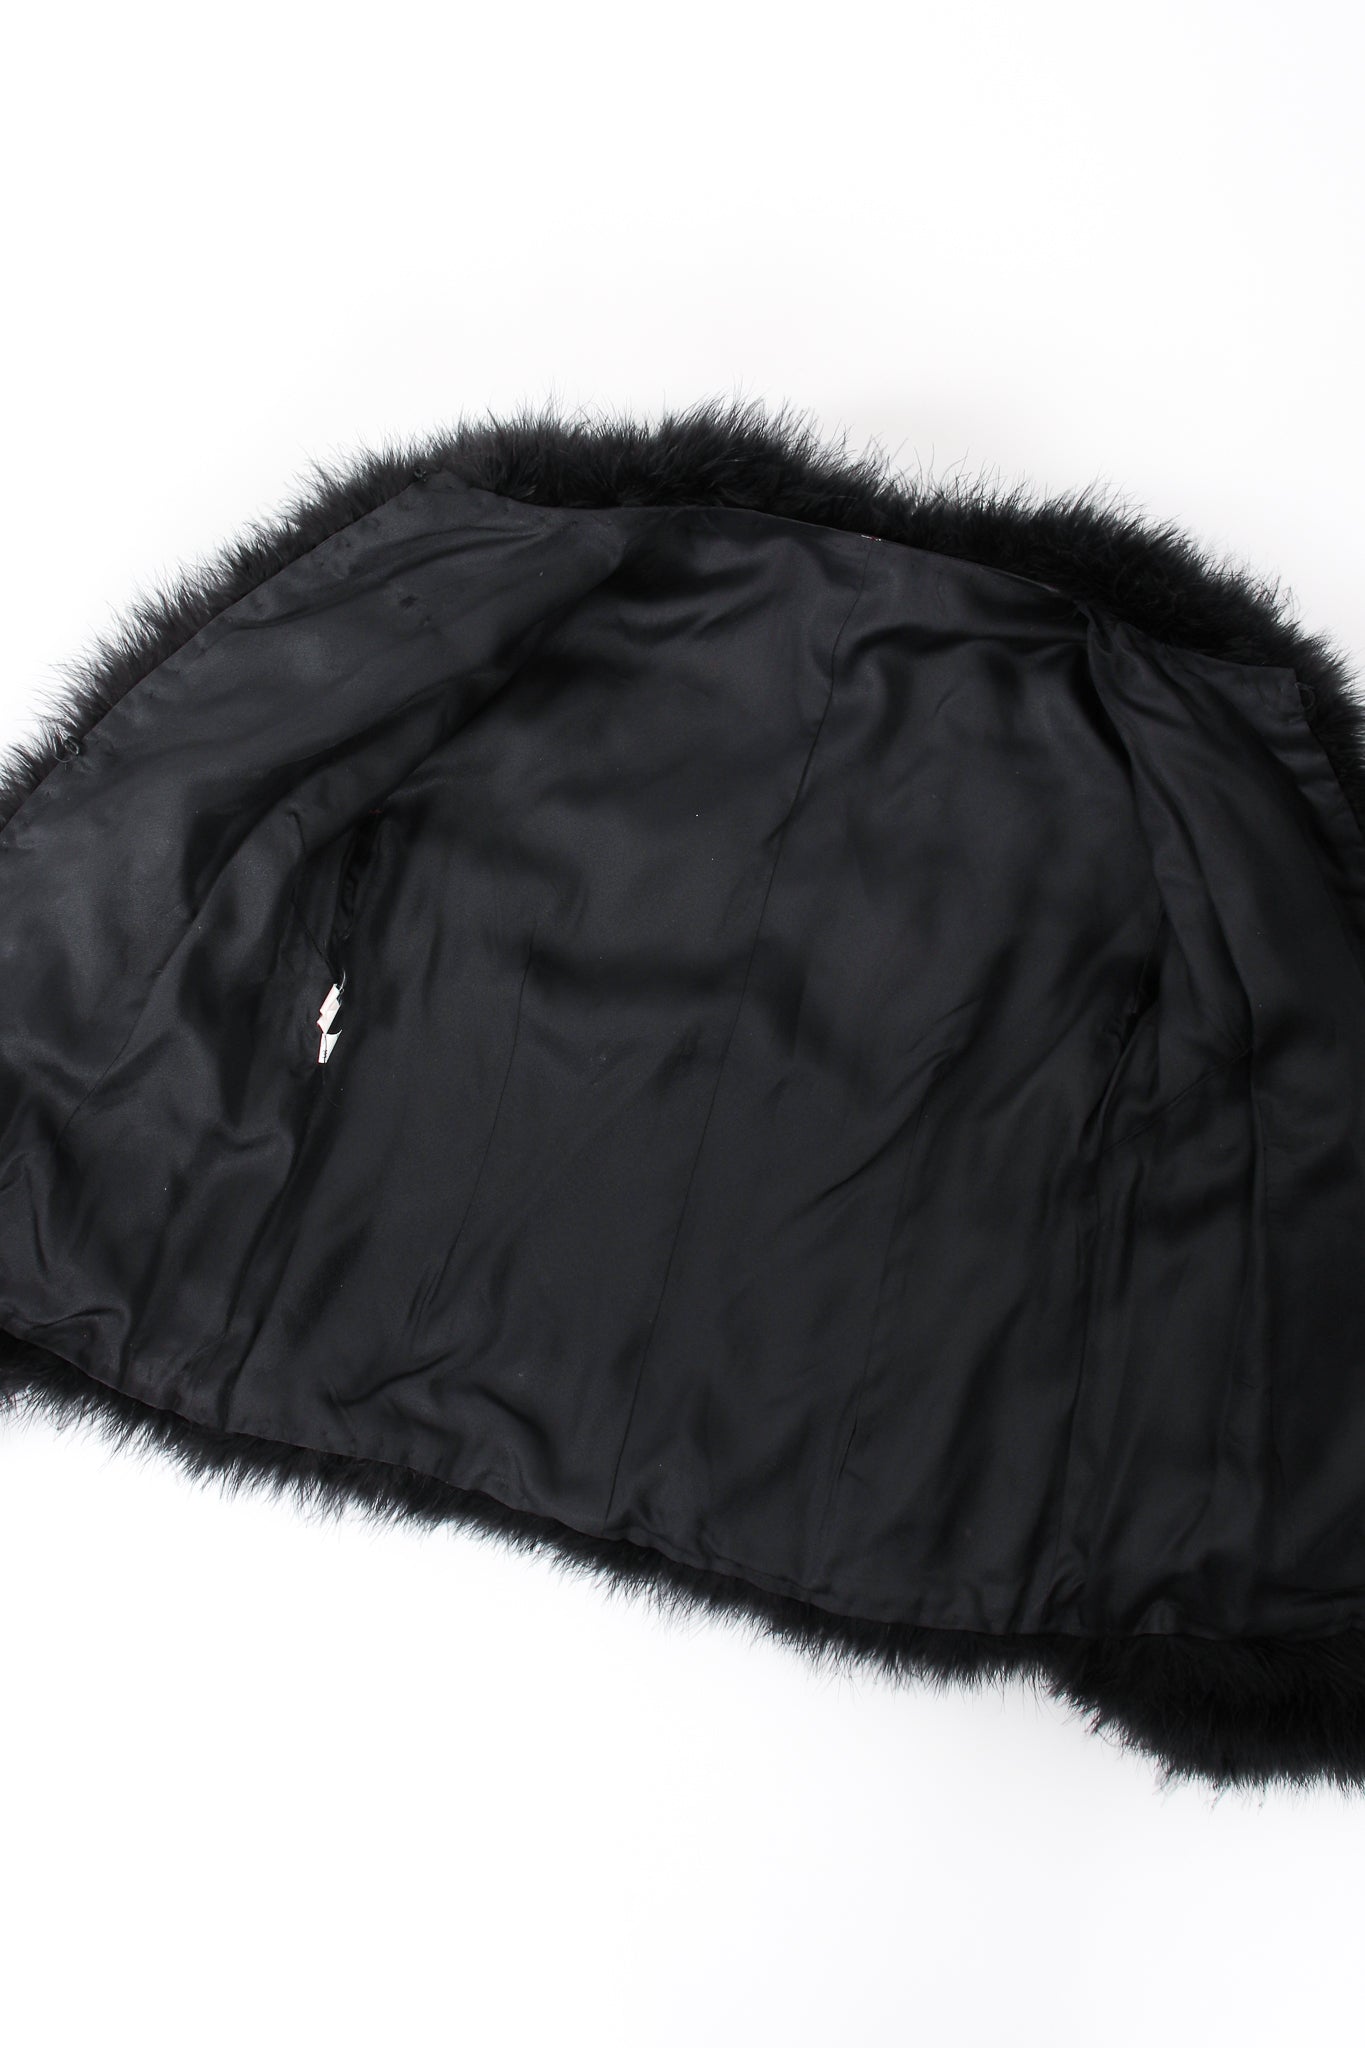 Vintage Black Chubby Marabou Feather Jacket lining at Recess Los Angeles